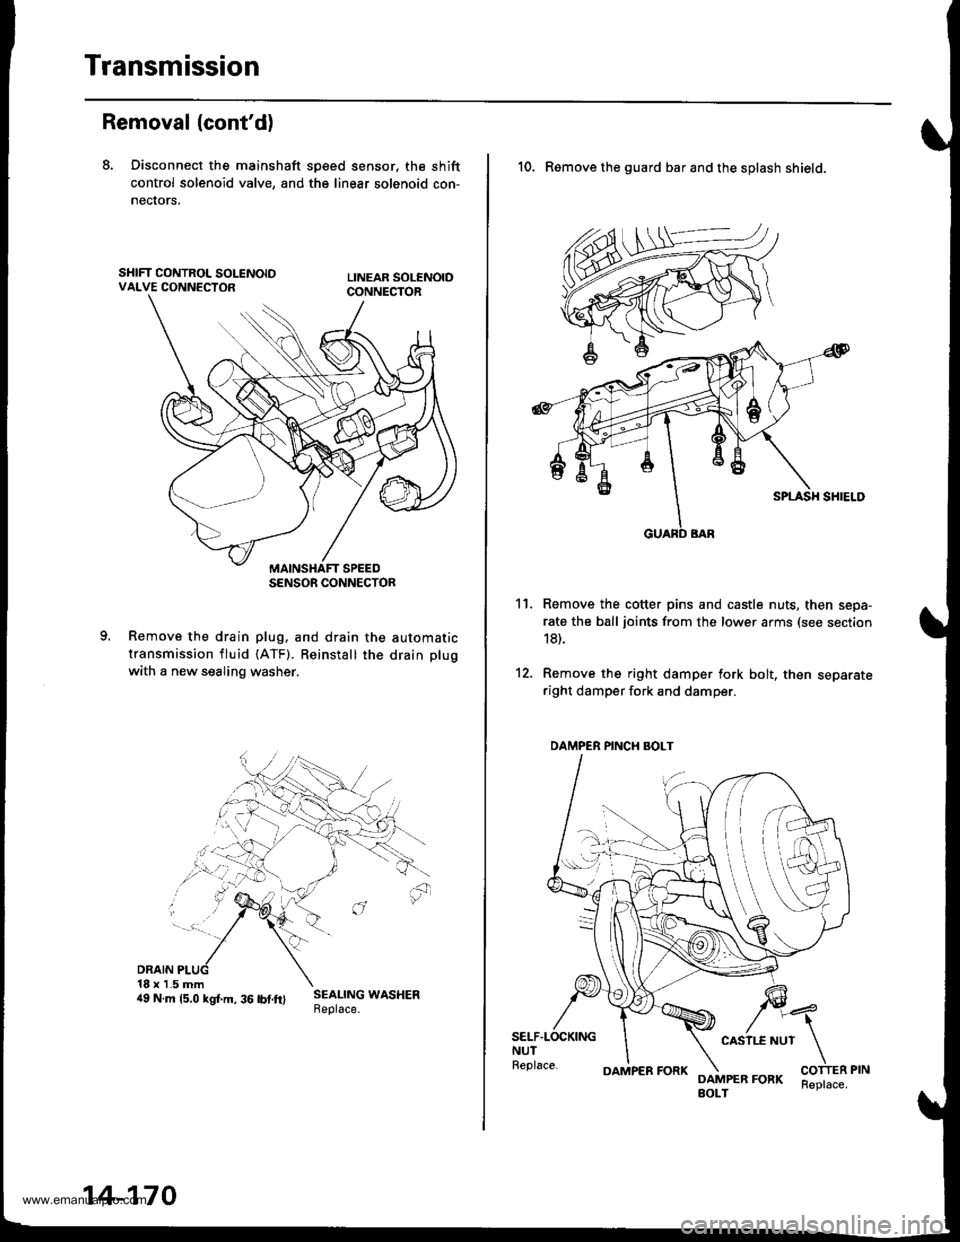 HONDA CR-V 1998 RD1-RD3 / 1.G Service Manual 
Transmission
Removal (contd)
8. Disconnect the mainshaft sp€ed sensor, the shift
control solenoid valve, and the linear solenoid con-
necrors,
Remove the drain plug. and drain the automatic
transm